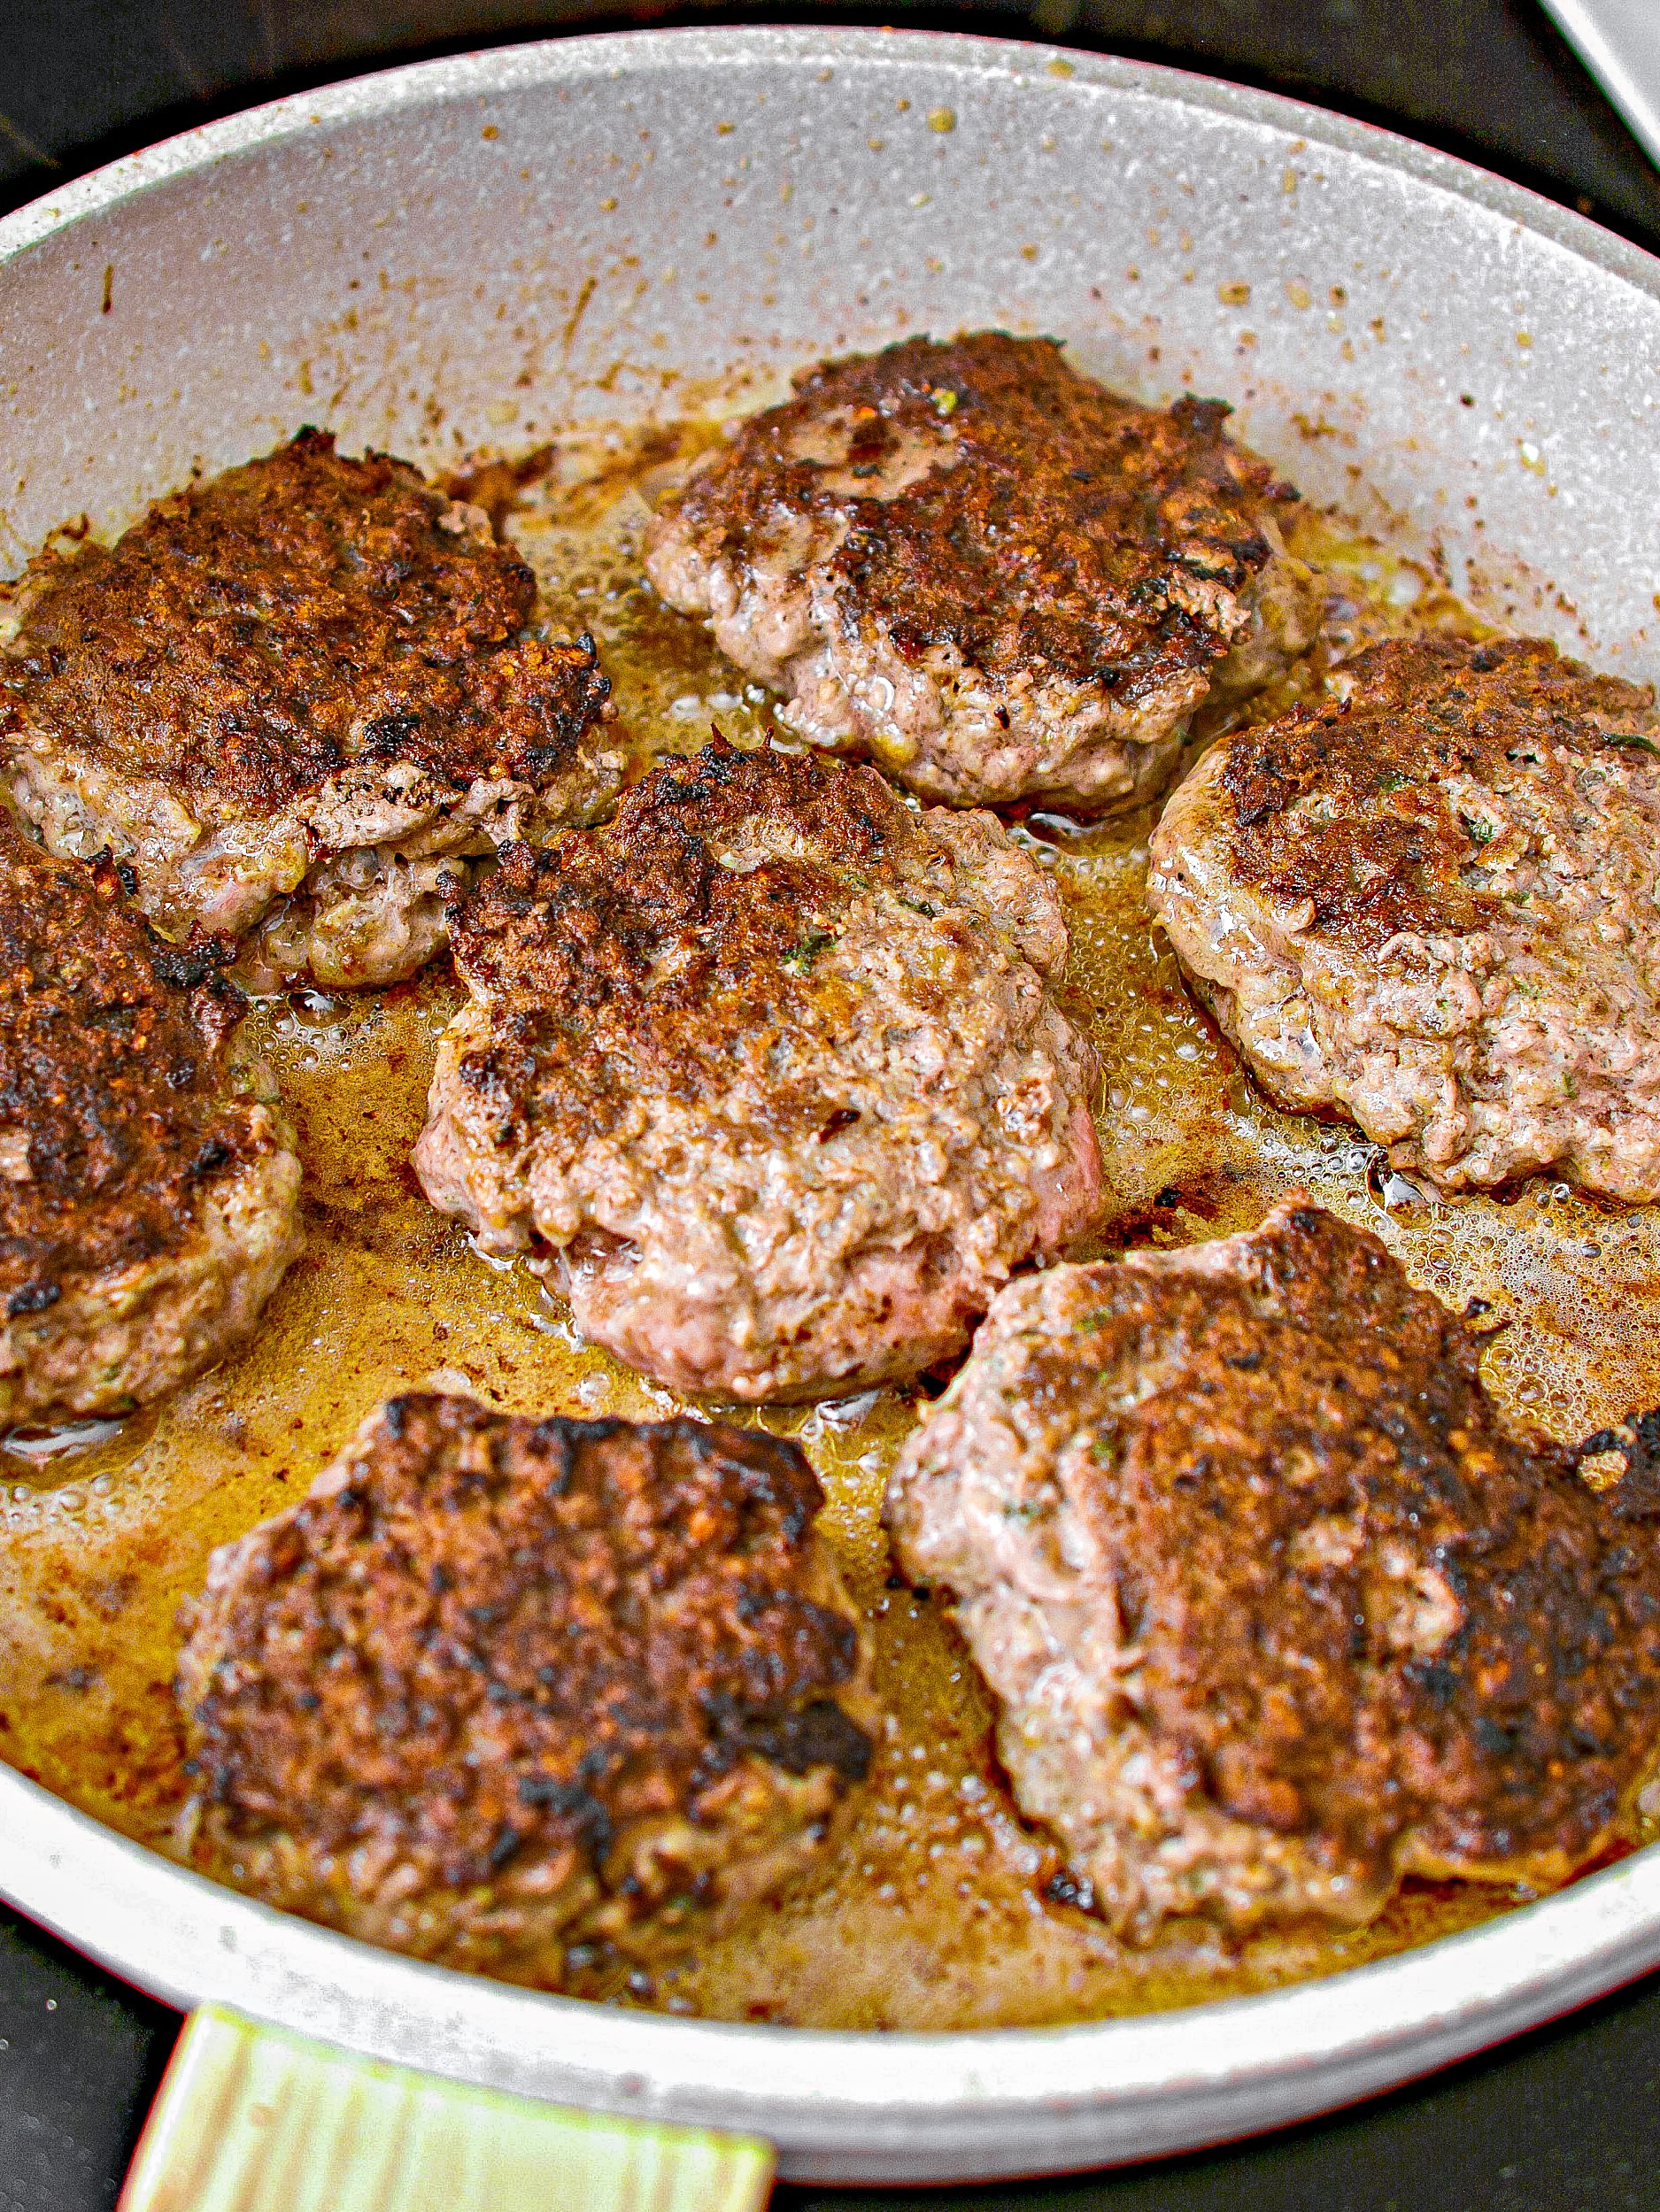 Heat a skillet over medium-high heat on the stove, and cook the patties until done to your liking. Remove and keep warm.